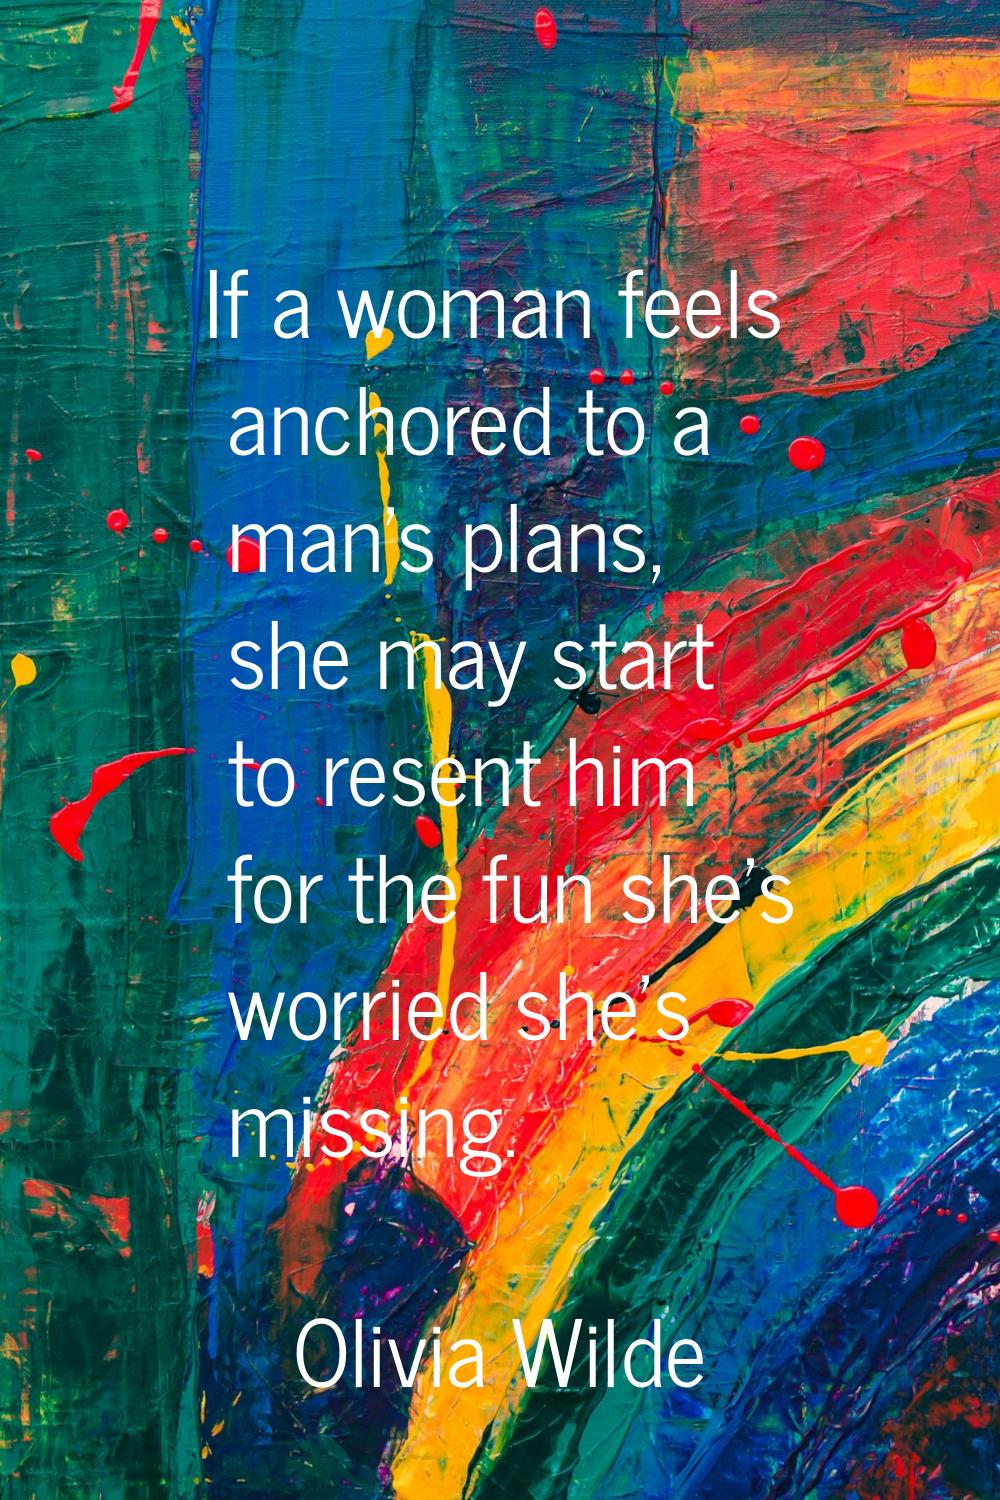 If a woman feels anchored to a man's plans, she may start to resent him for the fun she's worried s